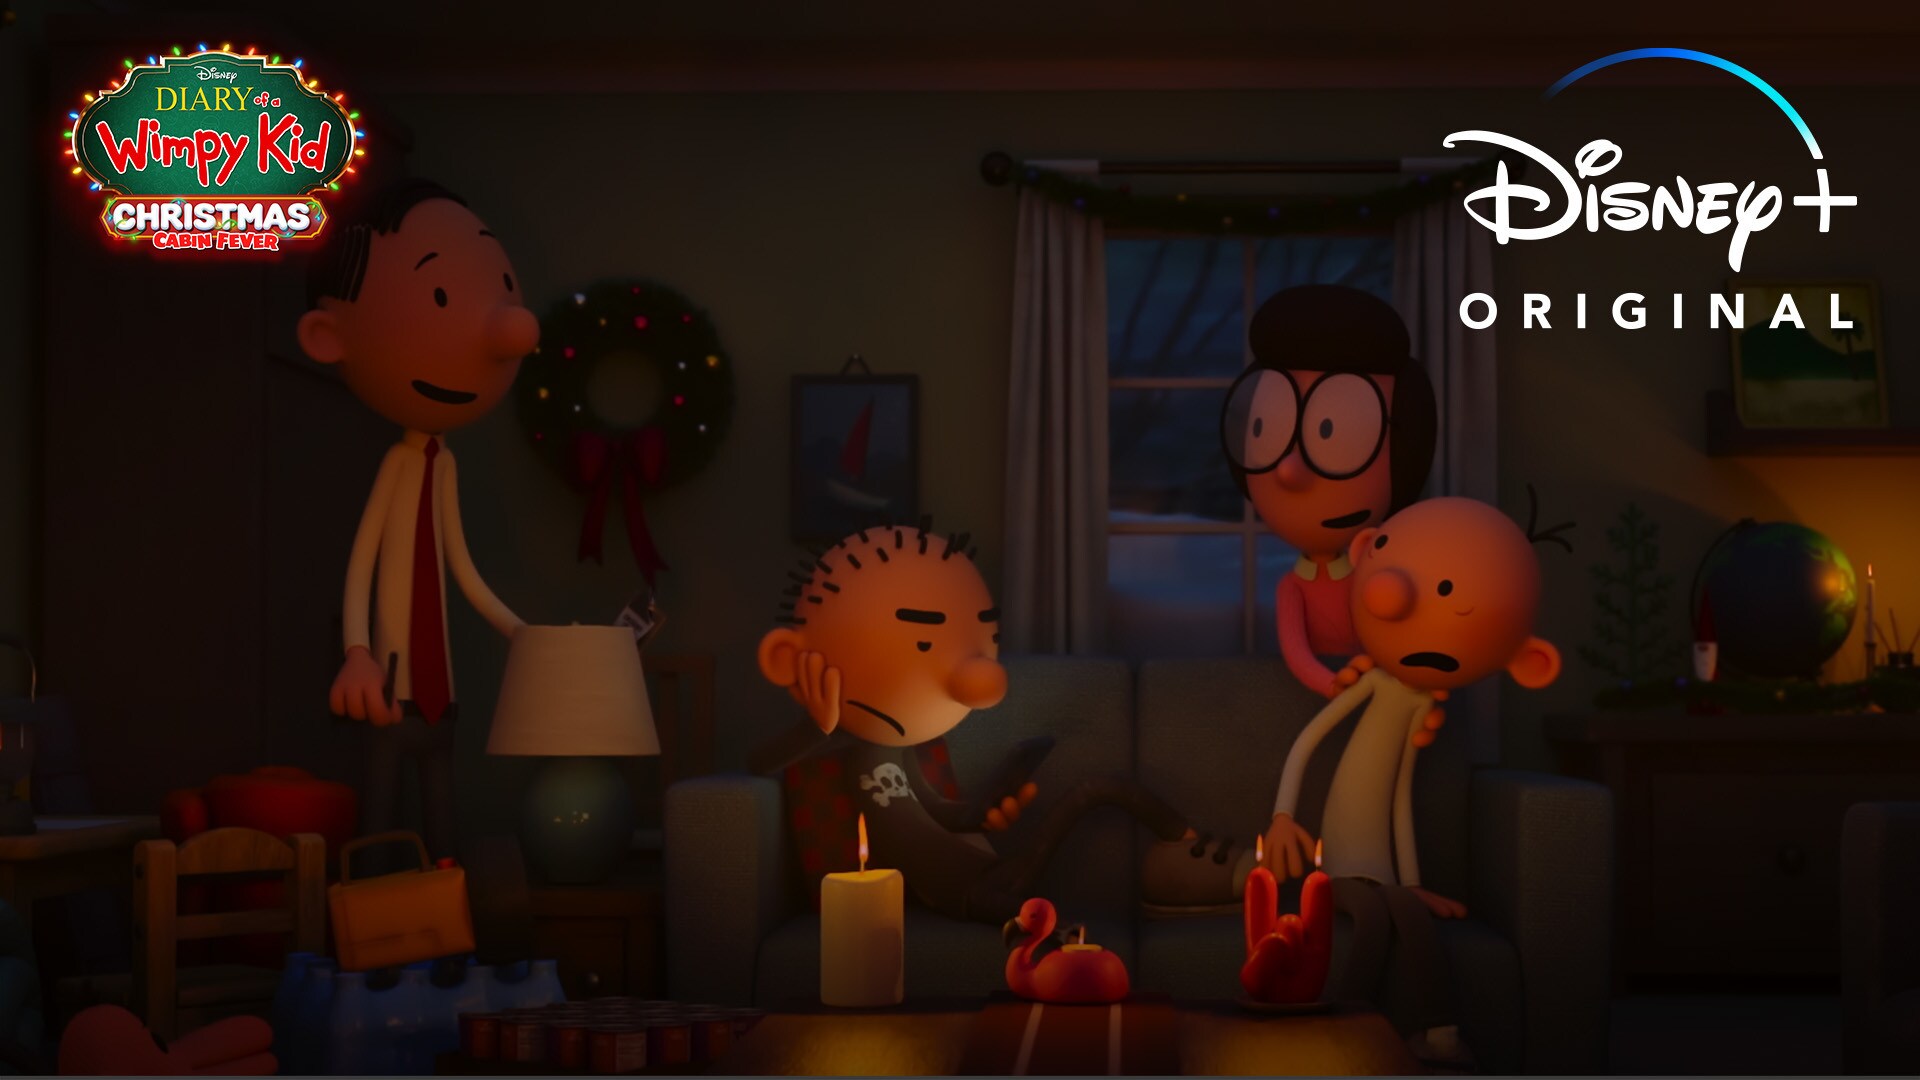 Get ready for the wimpiest Christmas ever! 🎄 Diary of a #WimpyKid  Christmas: Cabin Fever streams December 8 only on @DisneyPlus.